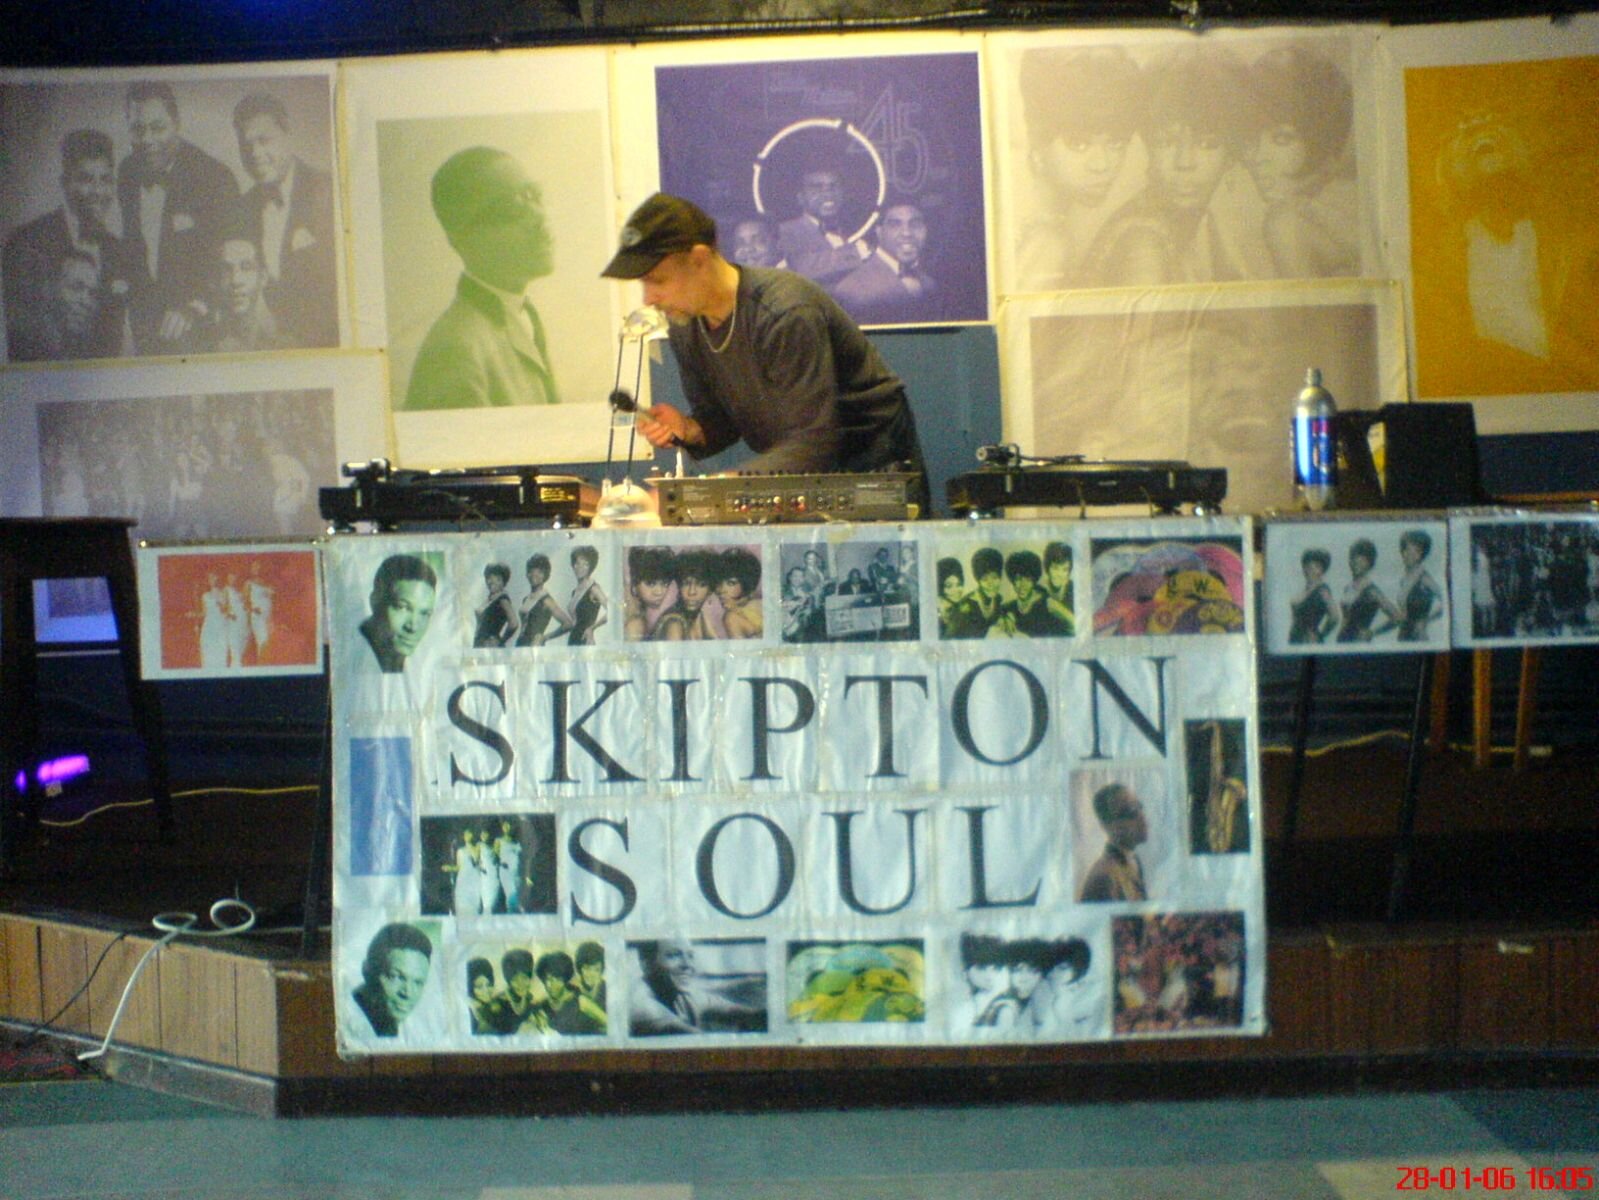 More from the L.M.S. Soul-in-Skipton February 16th